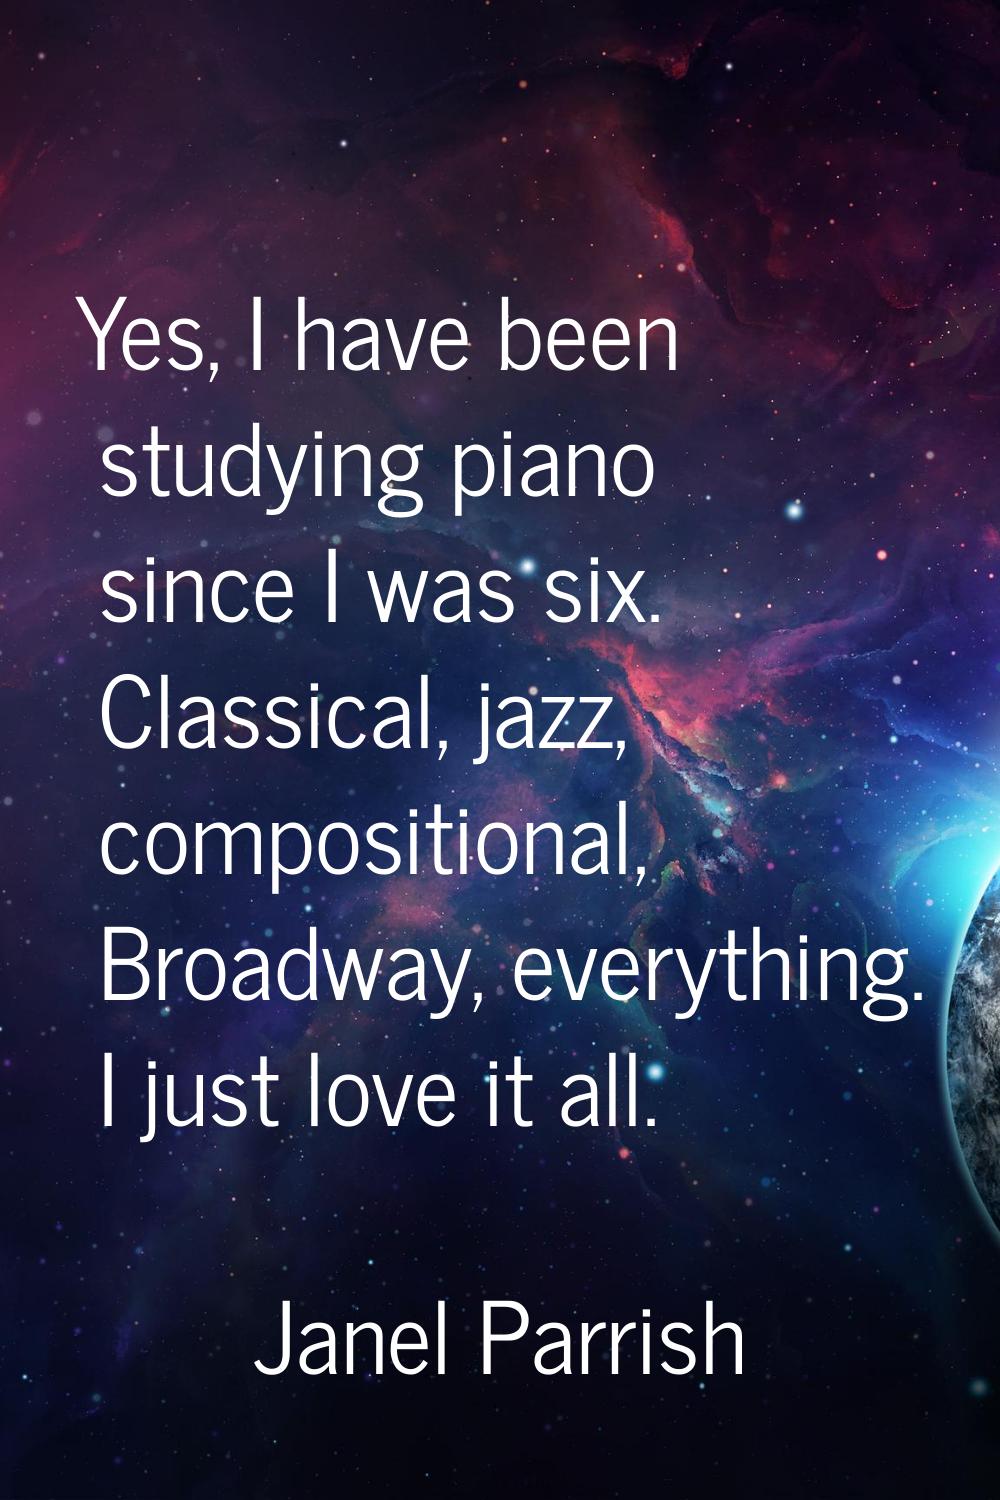 Yes, I have been studying piano since I was six. Classical, jazz, compositional, Broadway, everythi